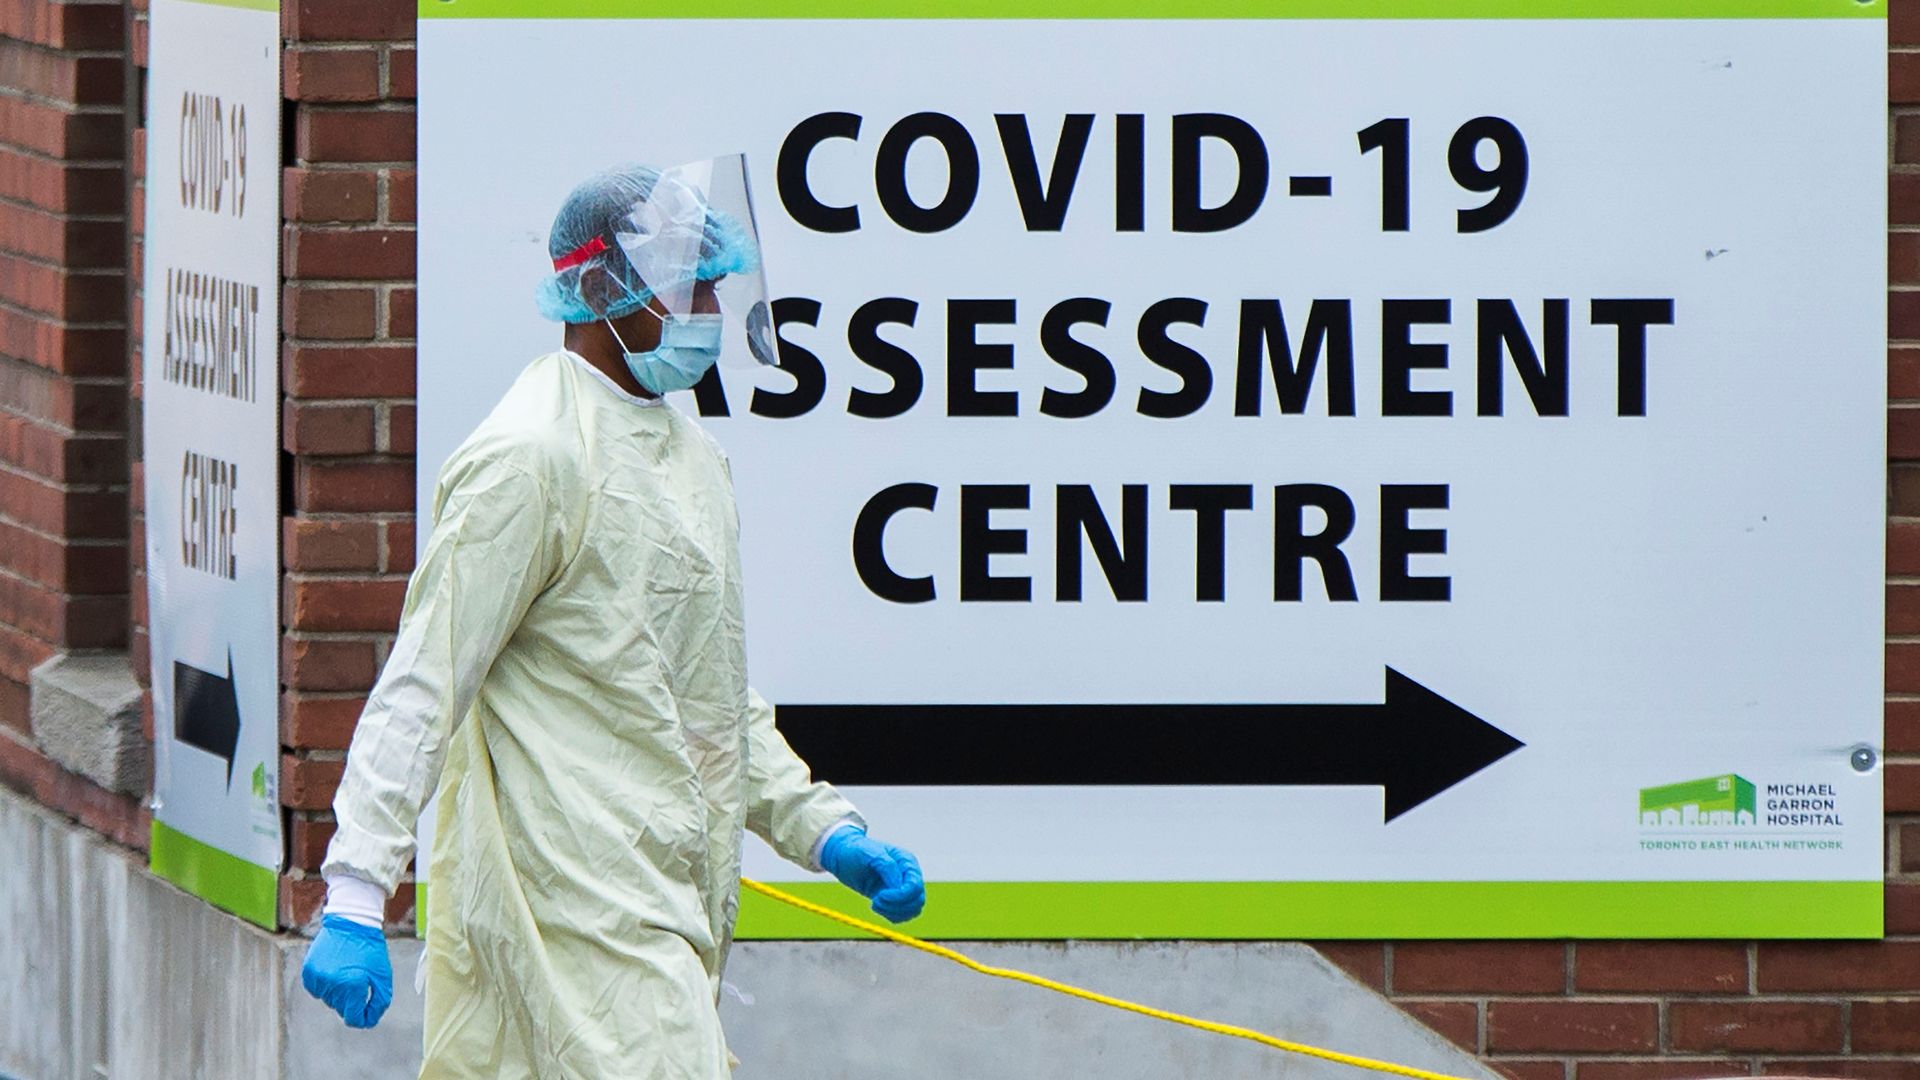  A medical worker wearing protective gear is seen outside a COVID-19 assessment center in Toronto, 